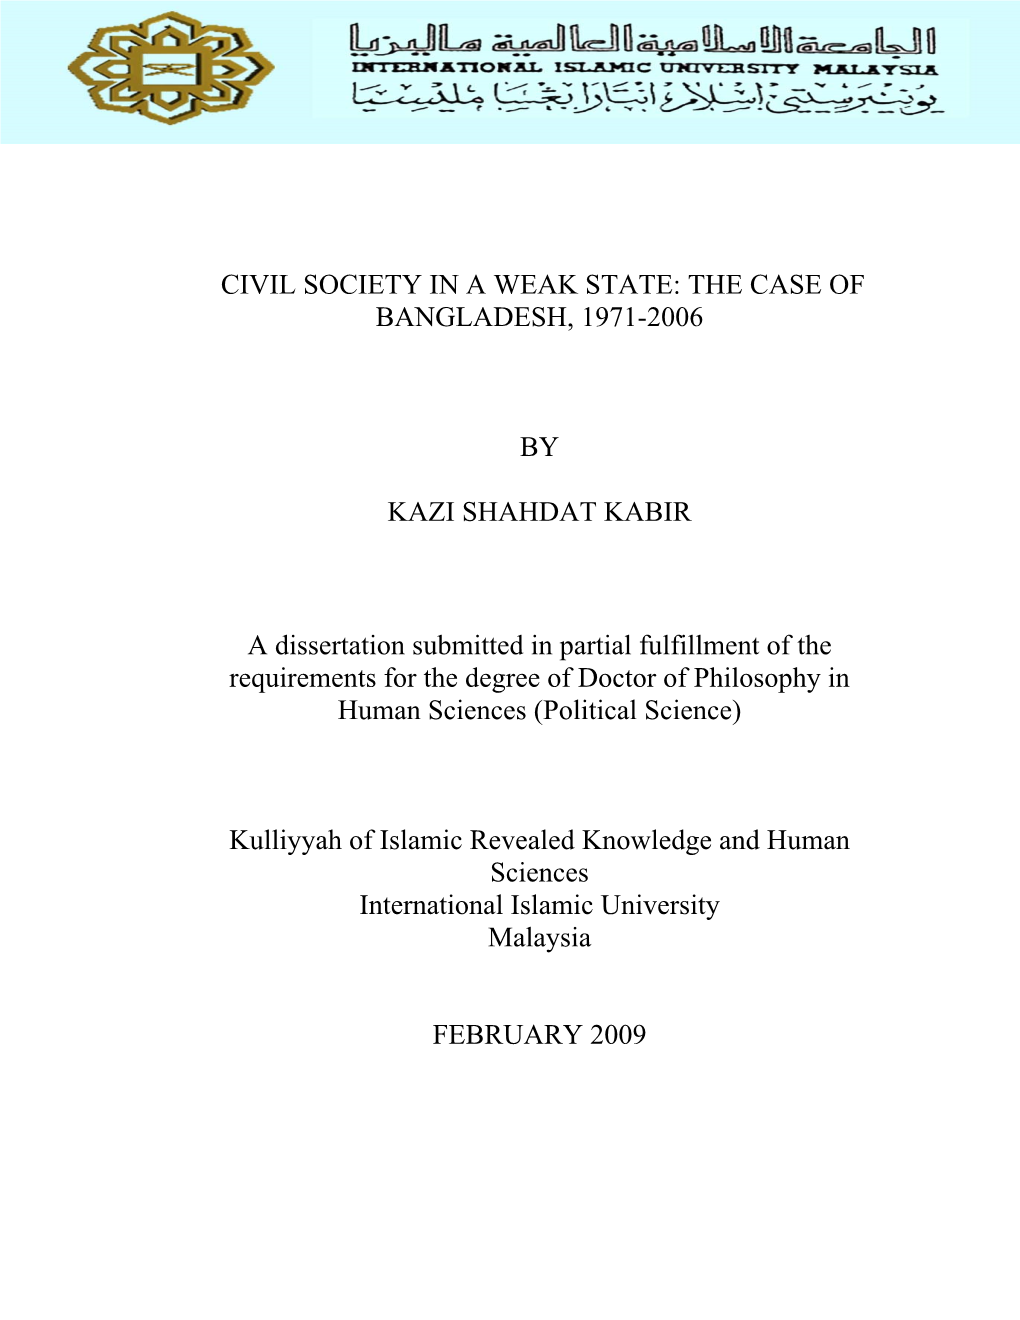 Civil Society in a Weak State: the Case of Bangladesh, 1971-2006